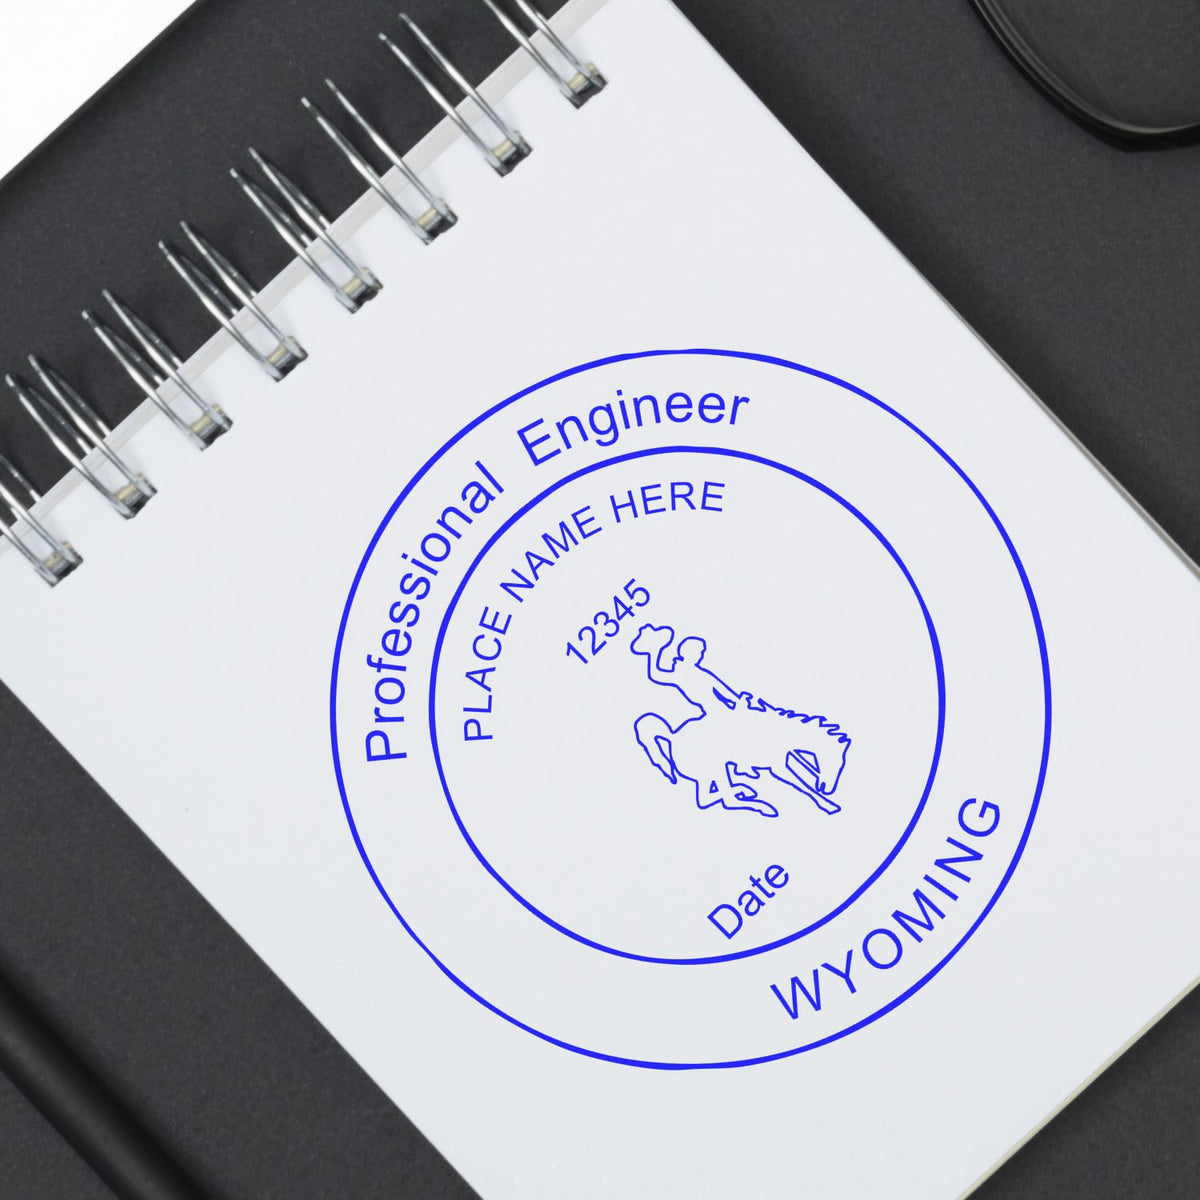 The Slim Pre-Inked Wyoming Professional Engineer Seal Stamp stamp impression comes to life with a crisp, detailed photo on paper - showcasing true professional quality.